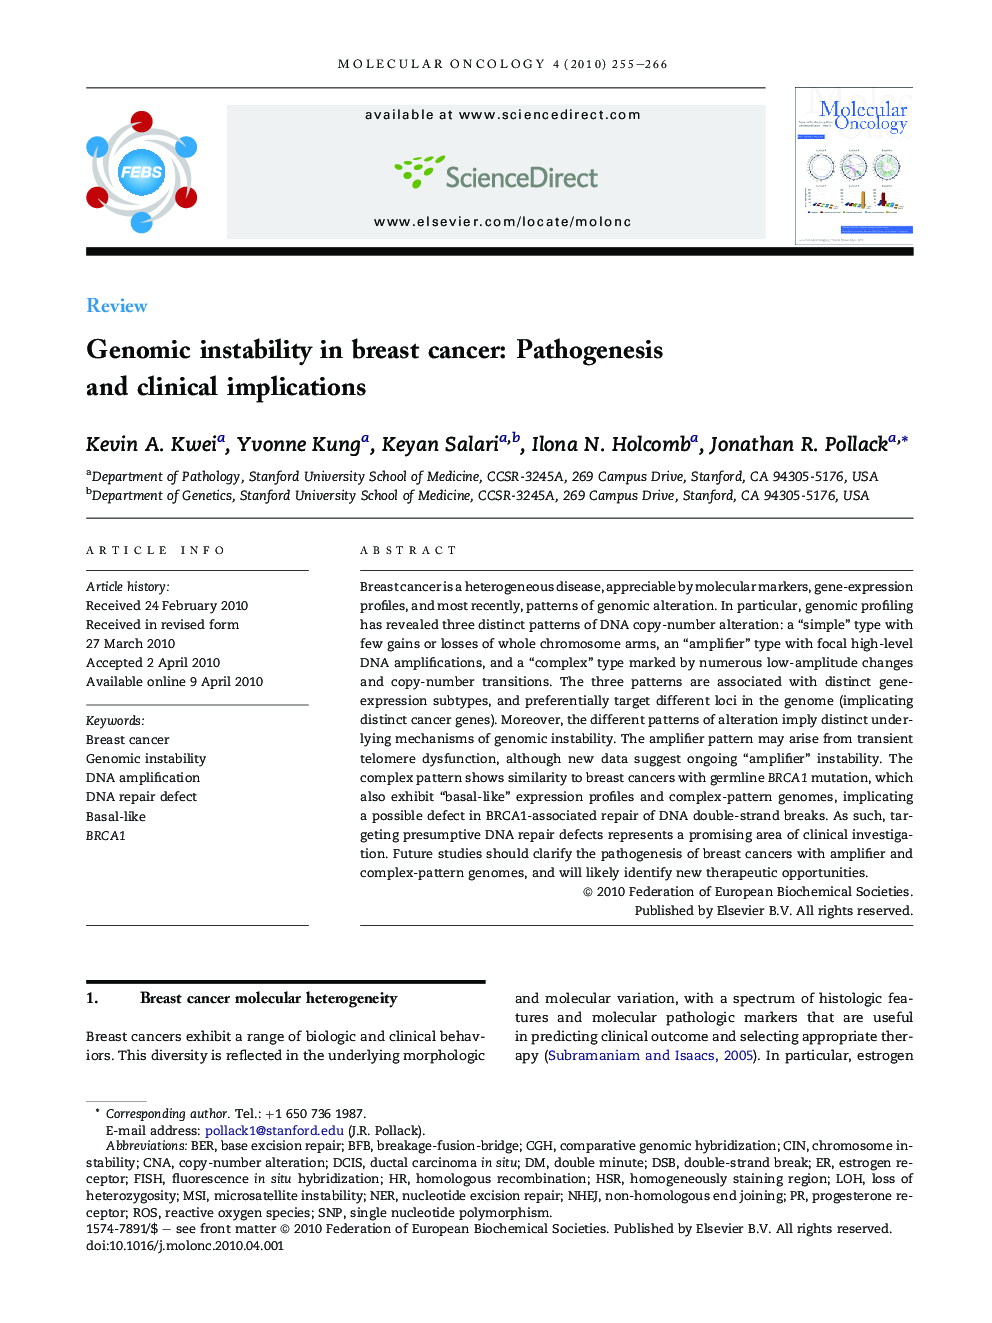 Genomic instability in breast cancer: Pathogenesis and clinical implications